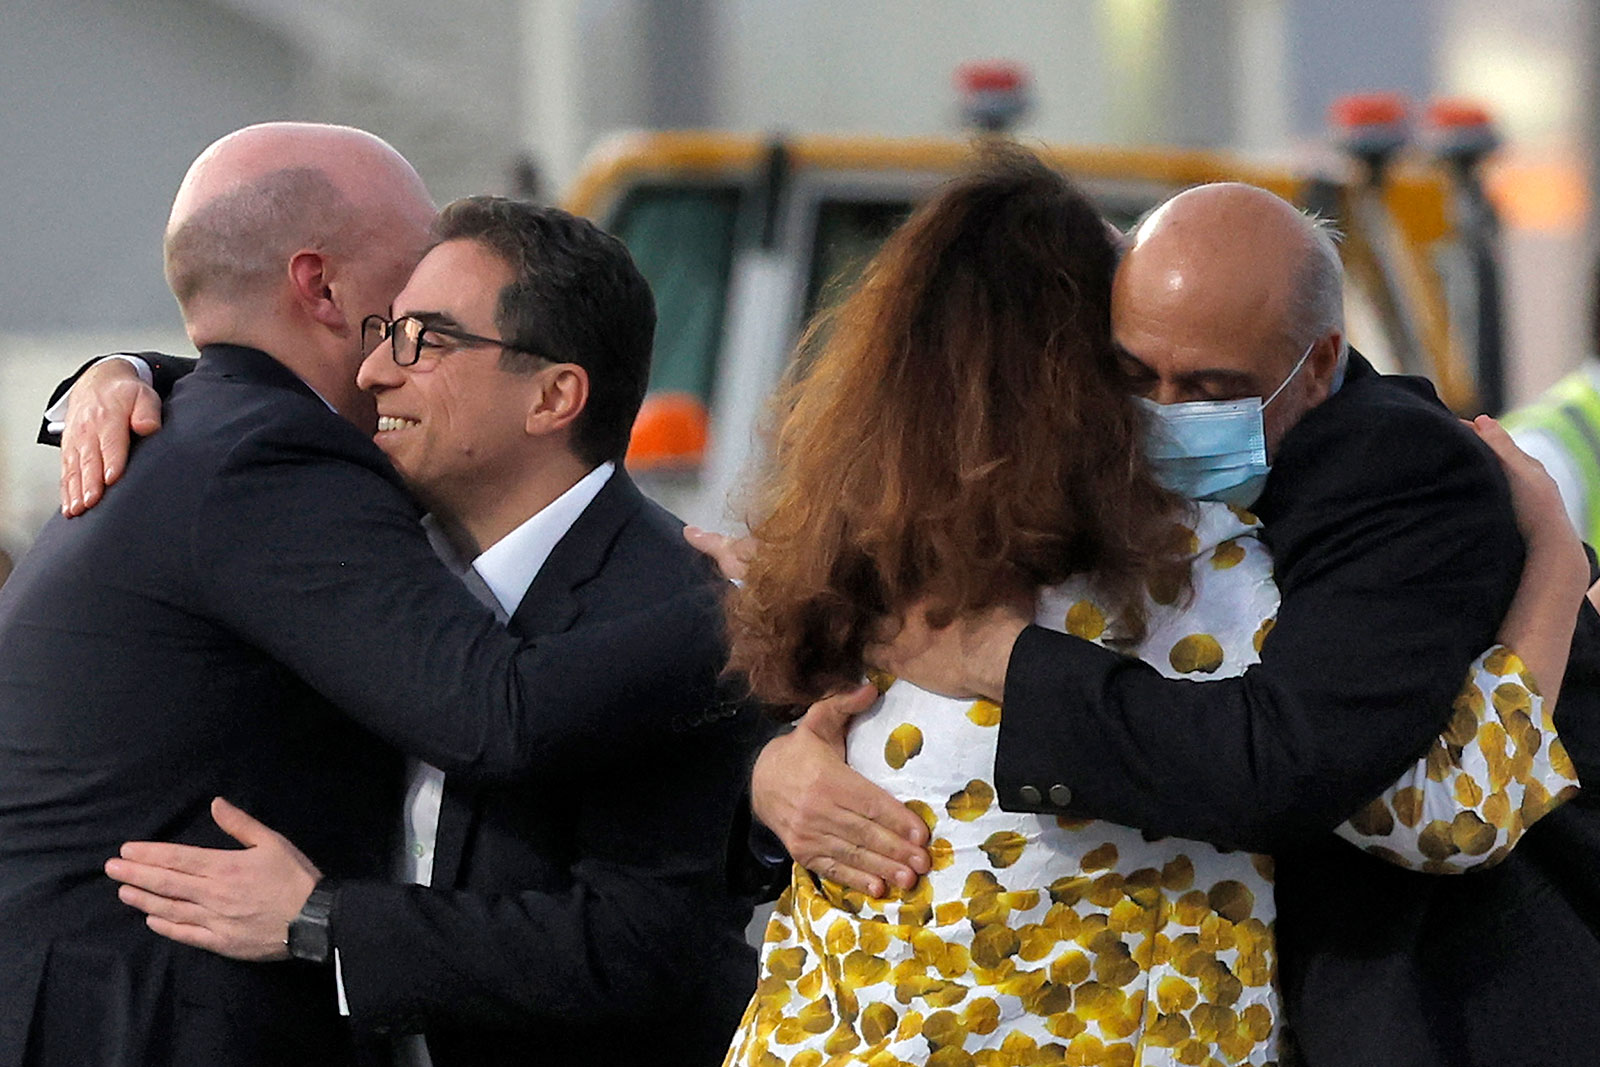 US citizens Siamak Namazi, second from left, and Morad Tahbaz, right, are embraced after disembarking from a jet in Doha, Qatar, on Monday, September 18.